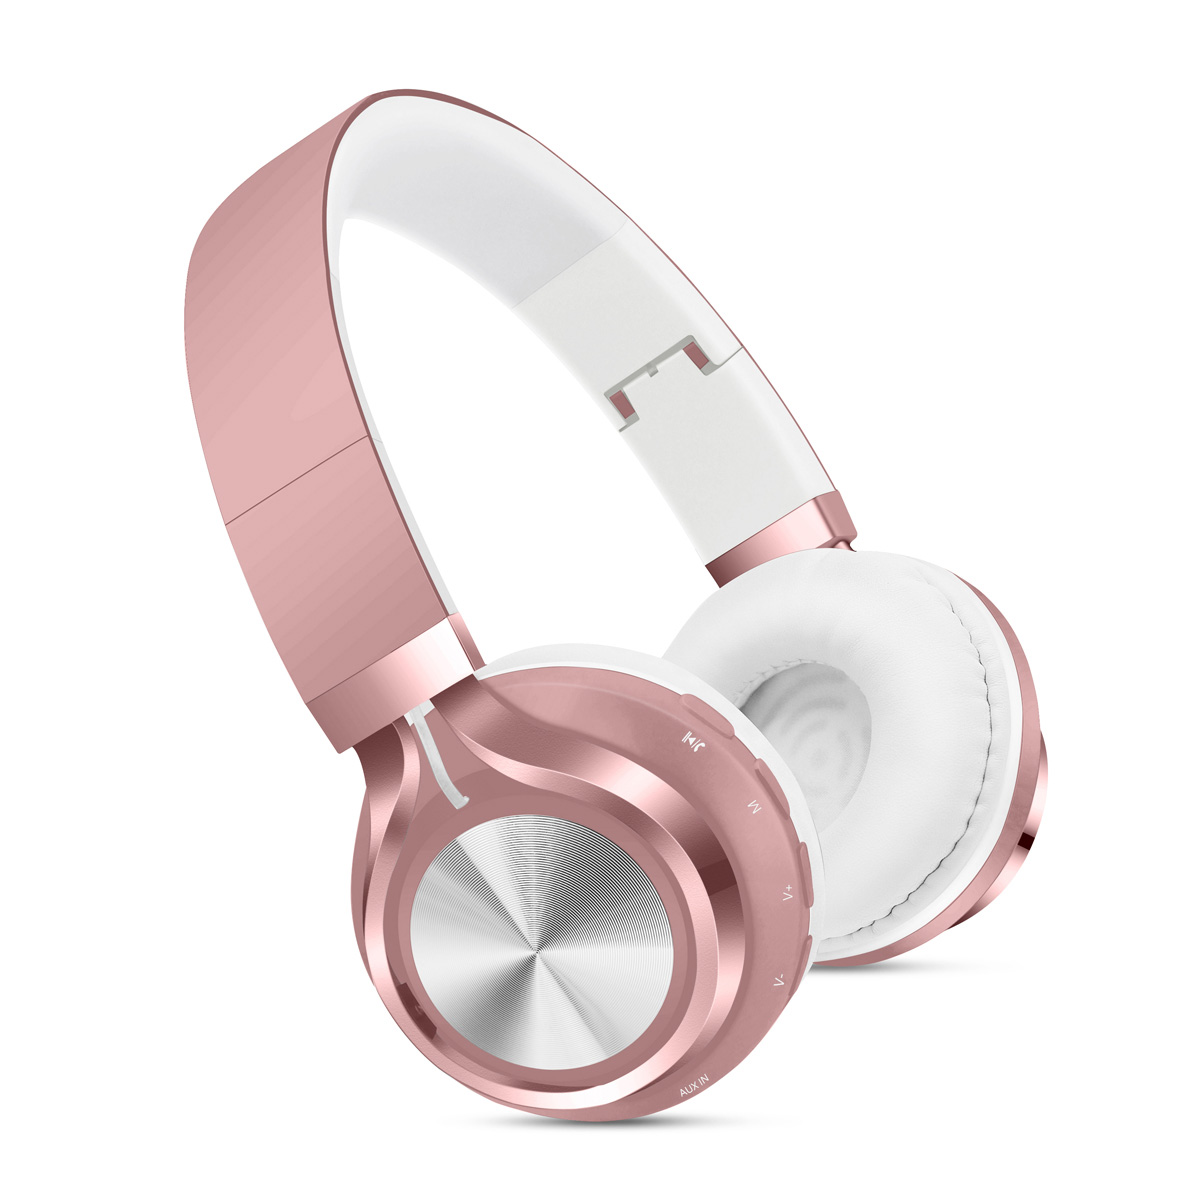 Super Bass Over the Ear Wireless Bluetooth Stereo HEADPHONE SK-01 (Pink)